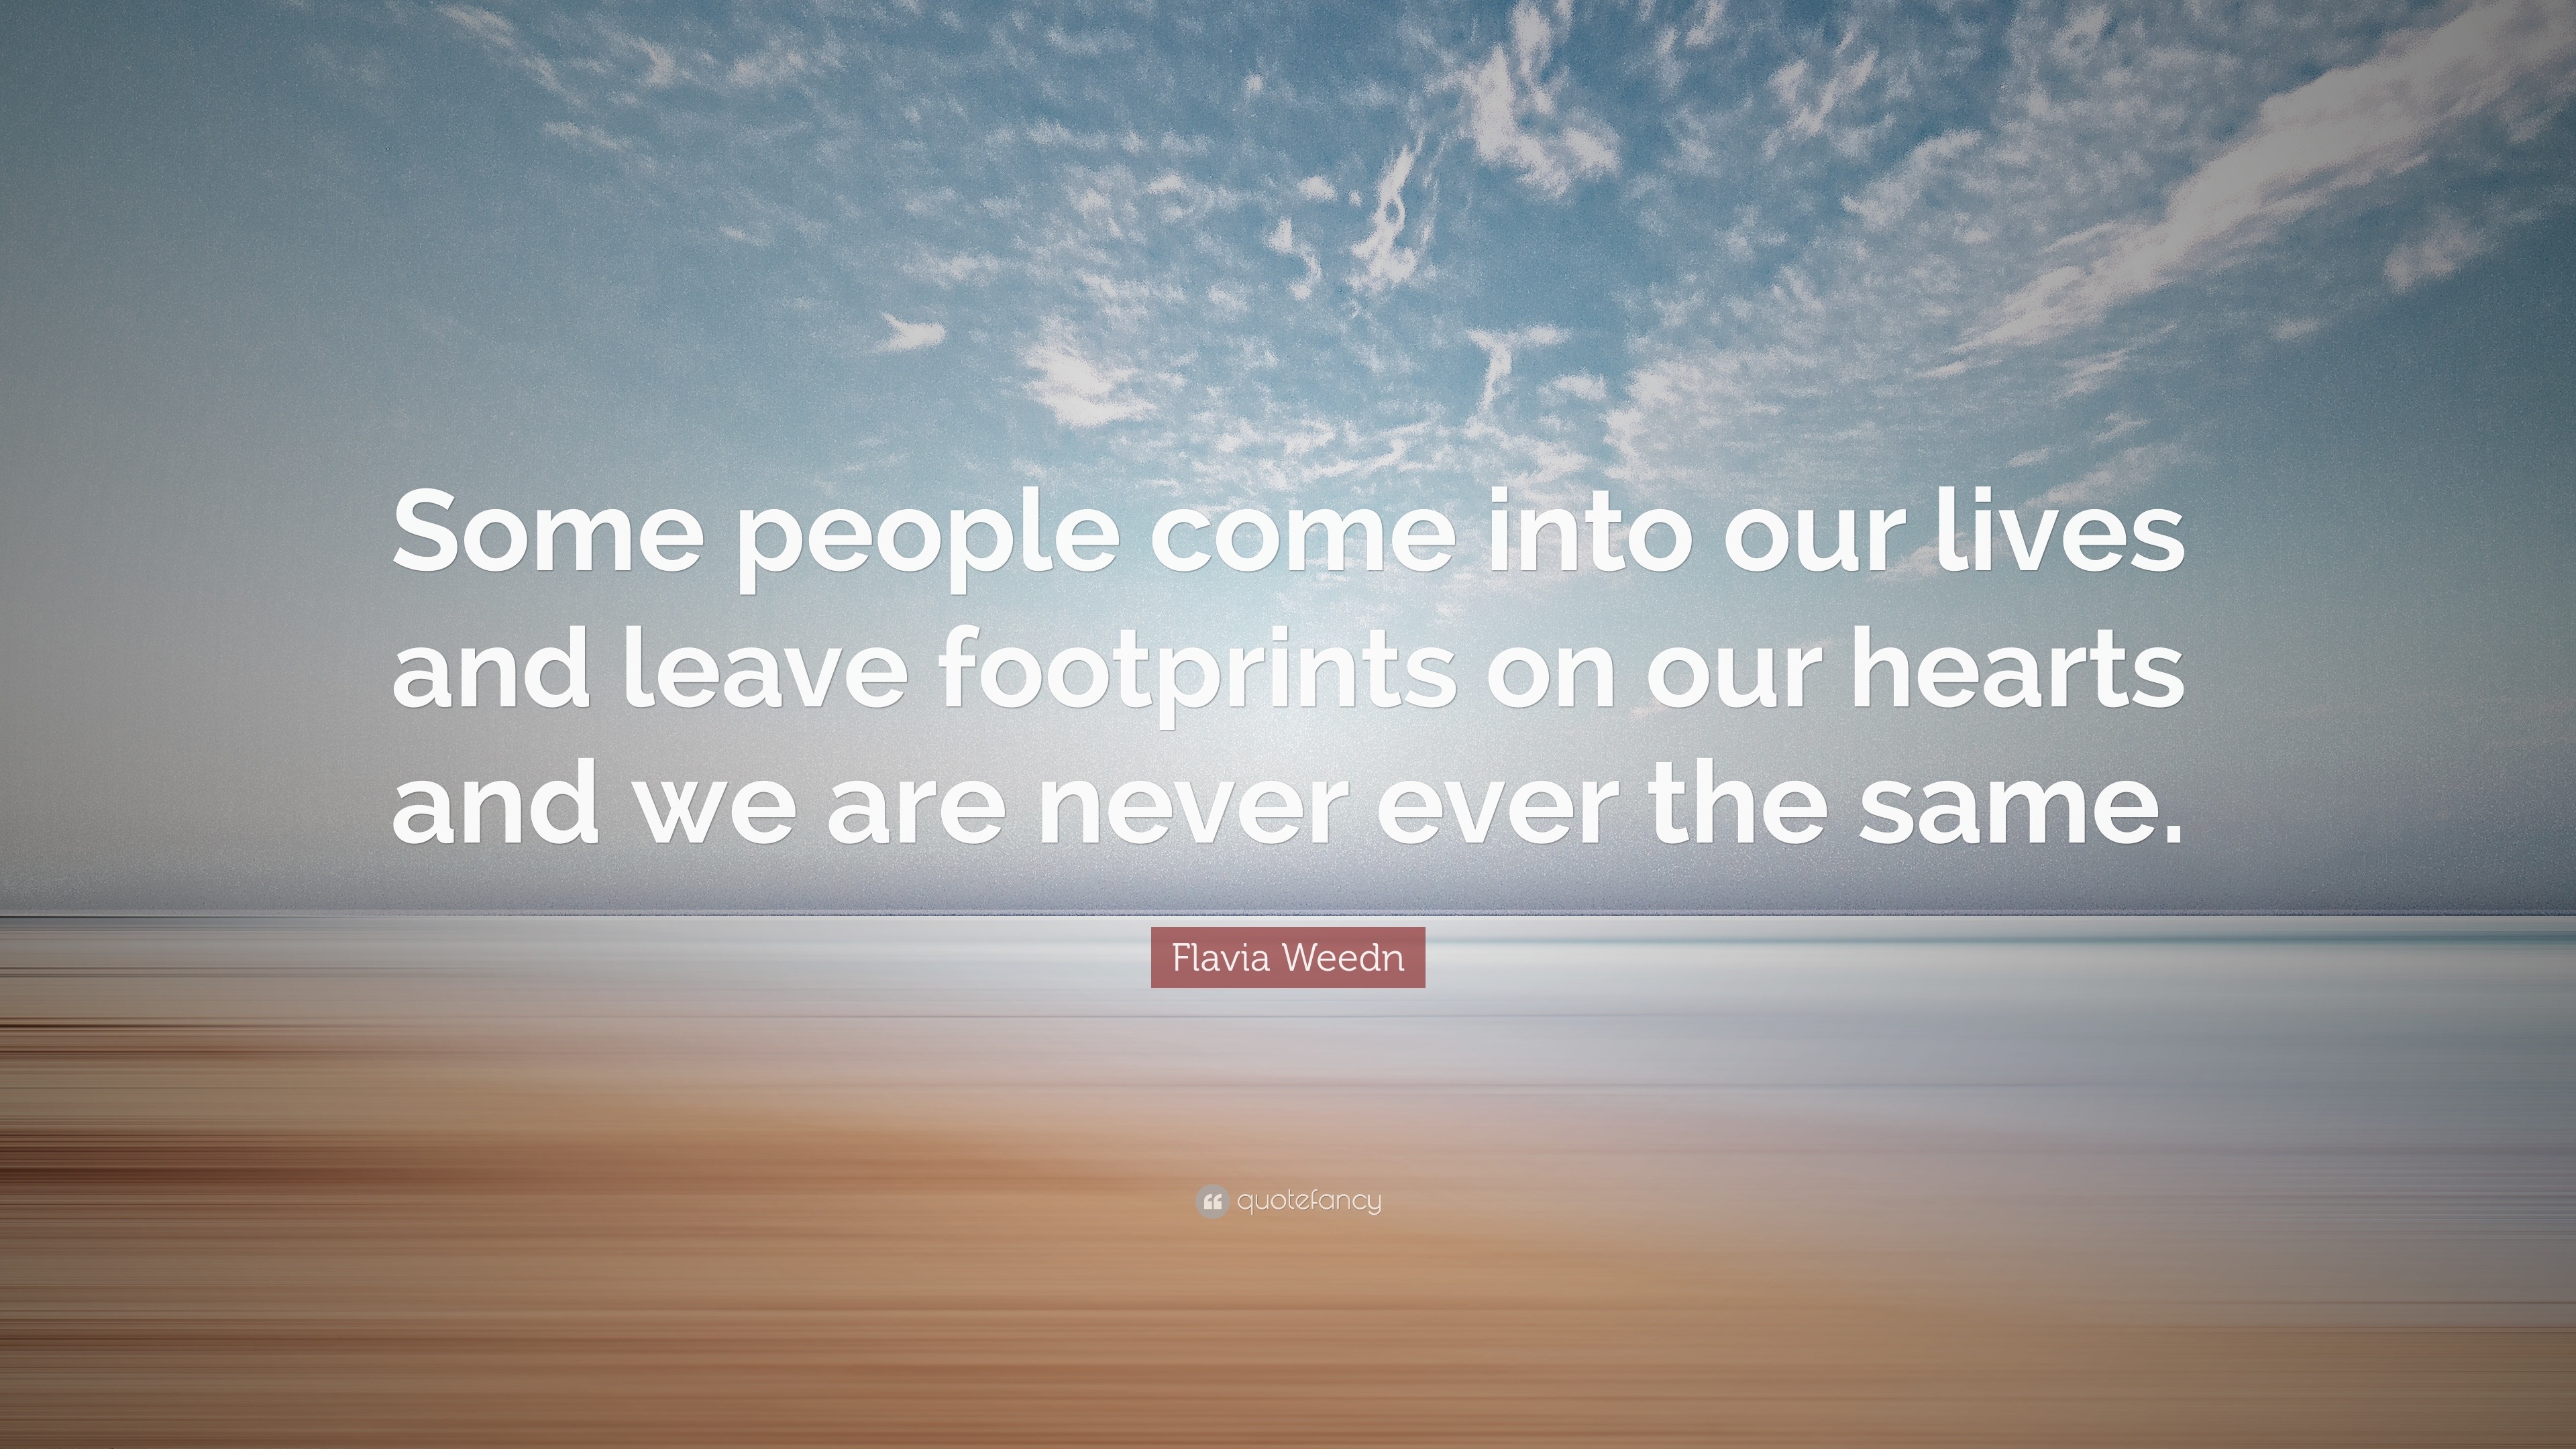 Flavia Weedn Quote: “Some people come into our lives and leave ...